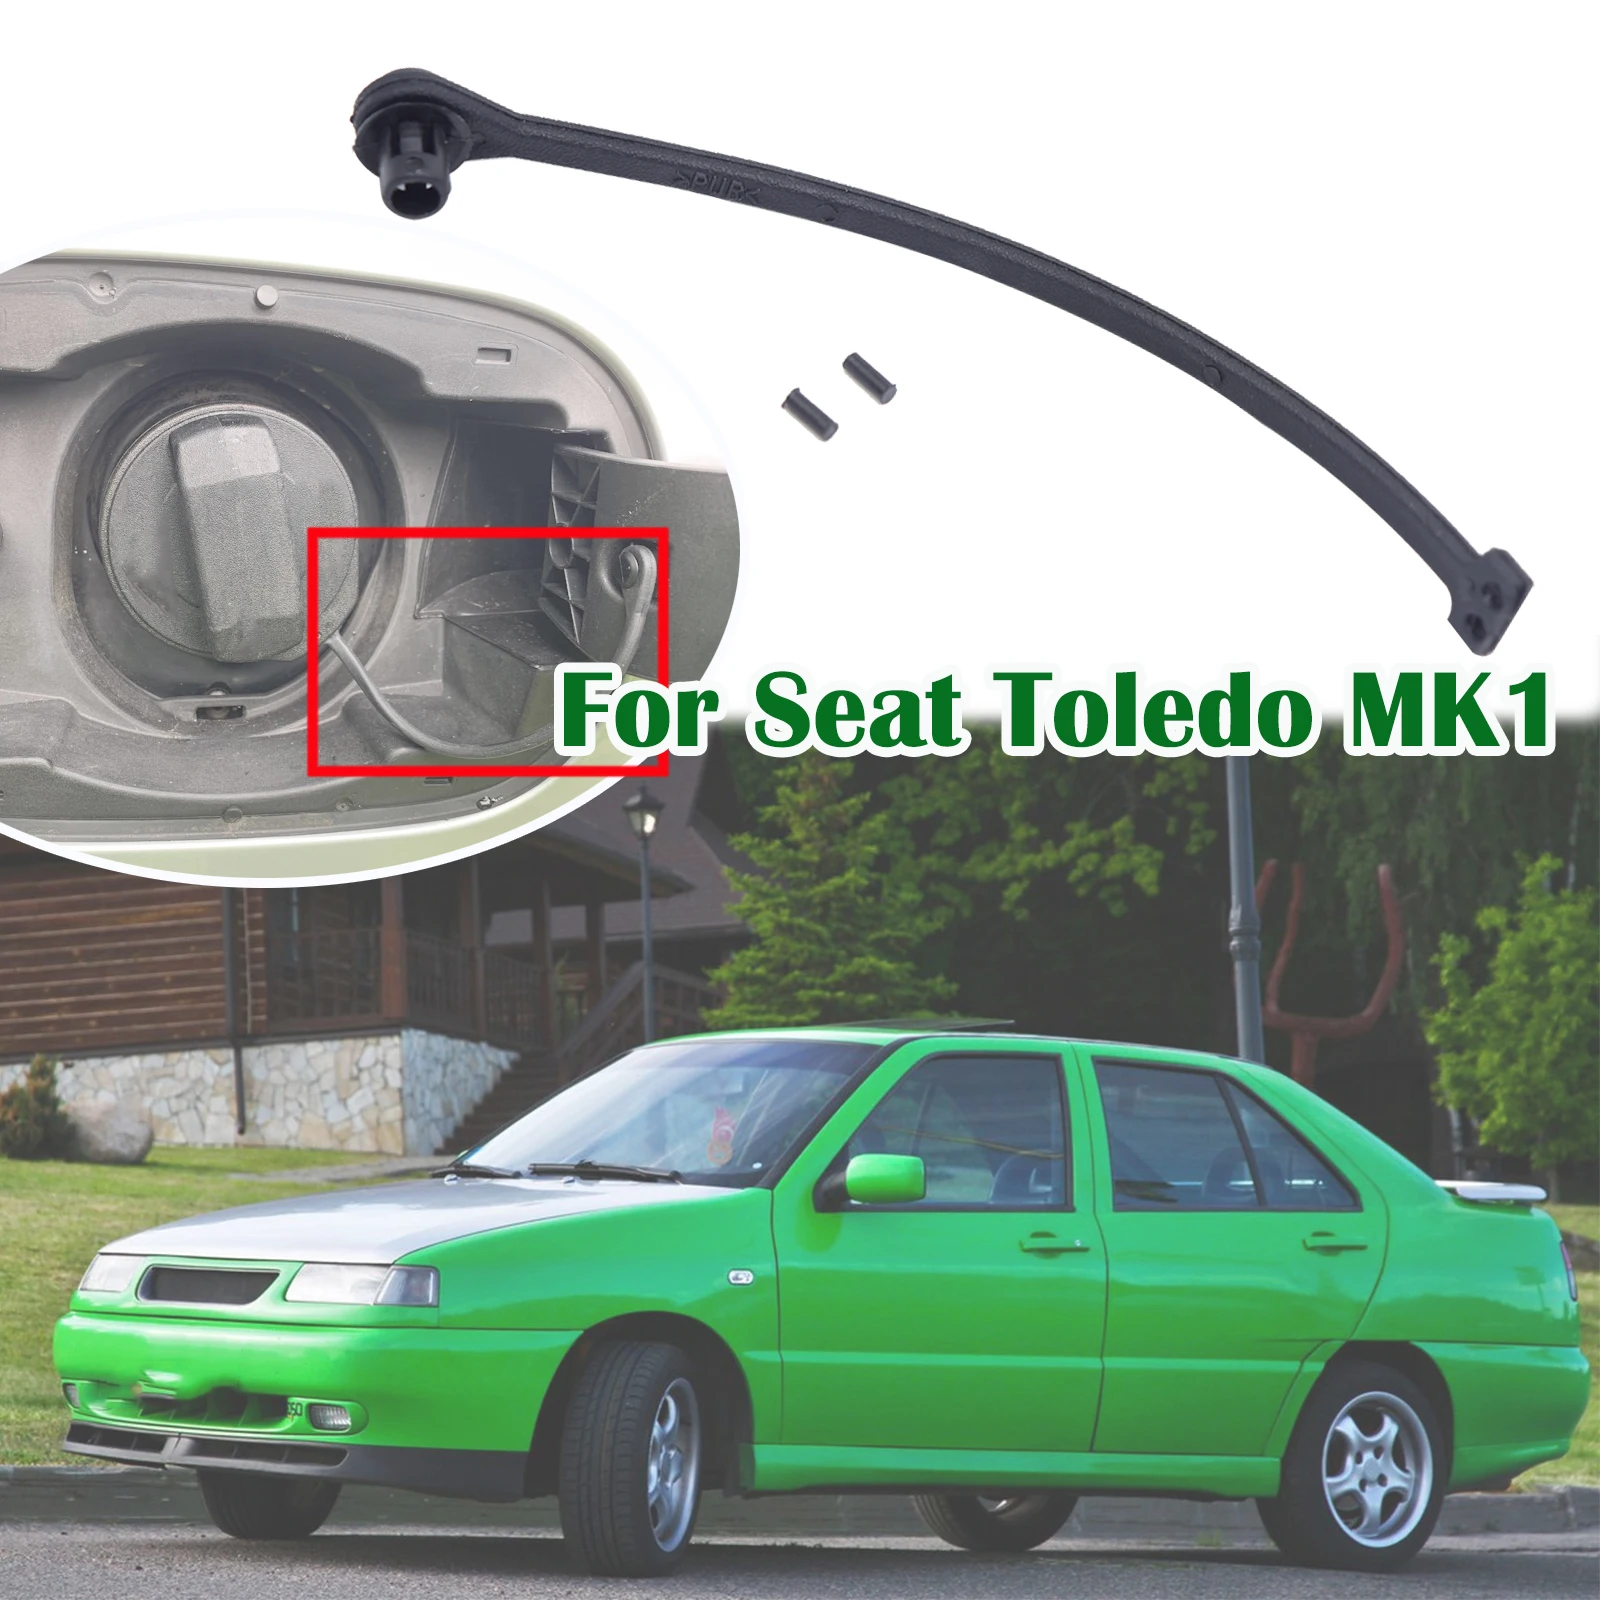 

For Seat Toledo MK1 MK2 1M 1L Fuel Oil Tank Cover Plug Petrol Diesel Cap Lid Gas Filler Support Retaining Strap Cord Rope Tether